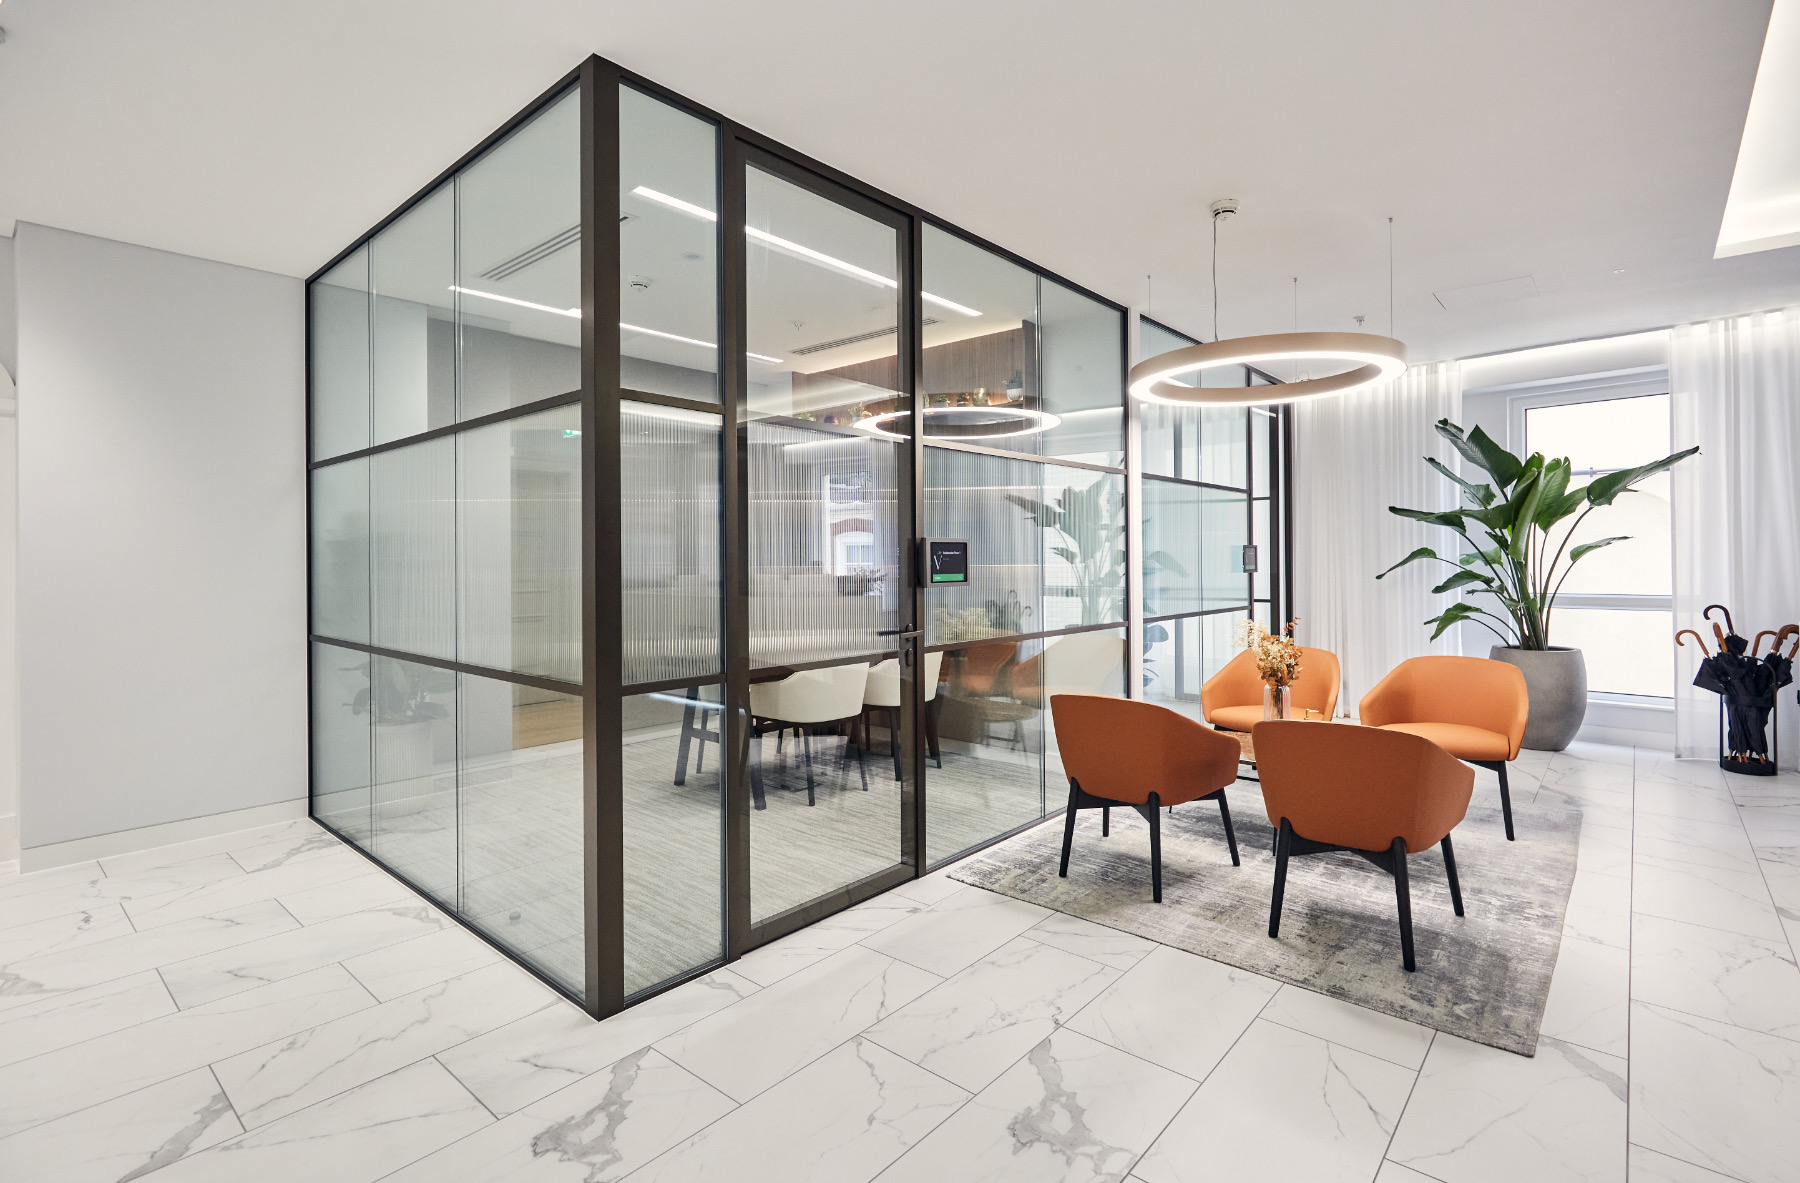 A Look Inside Valesco Group’s New London Office